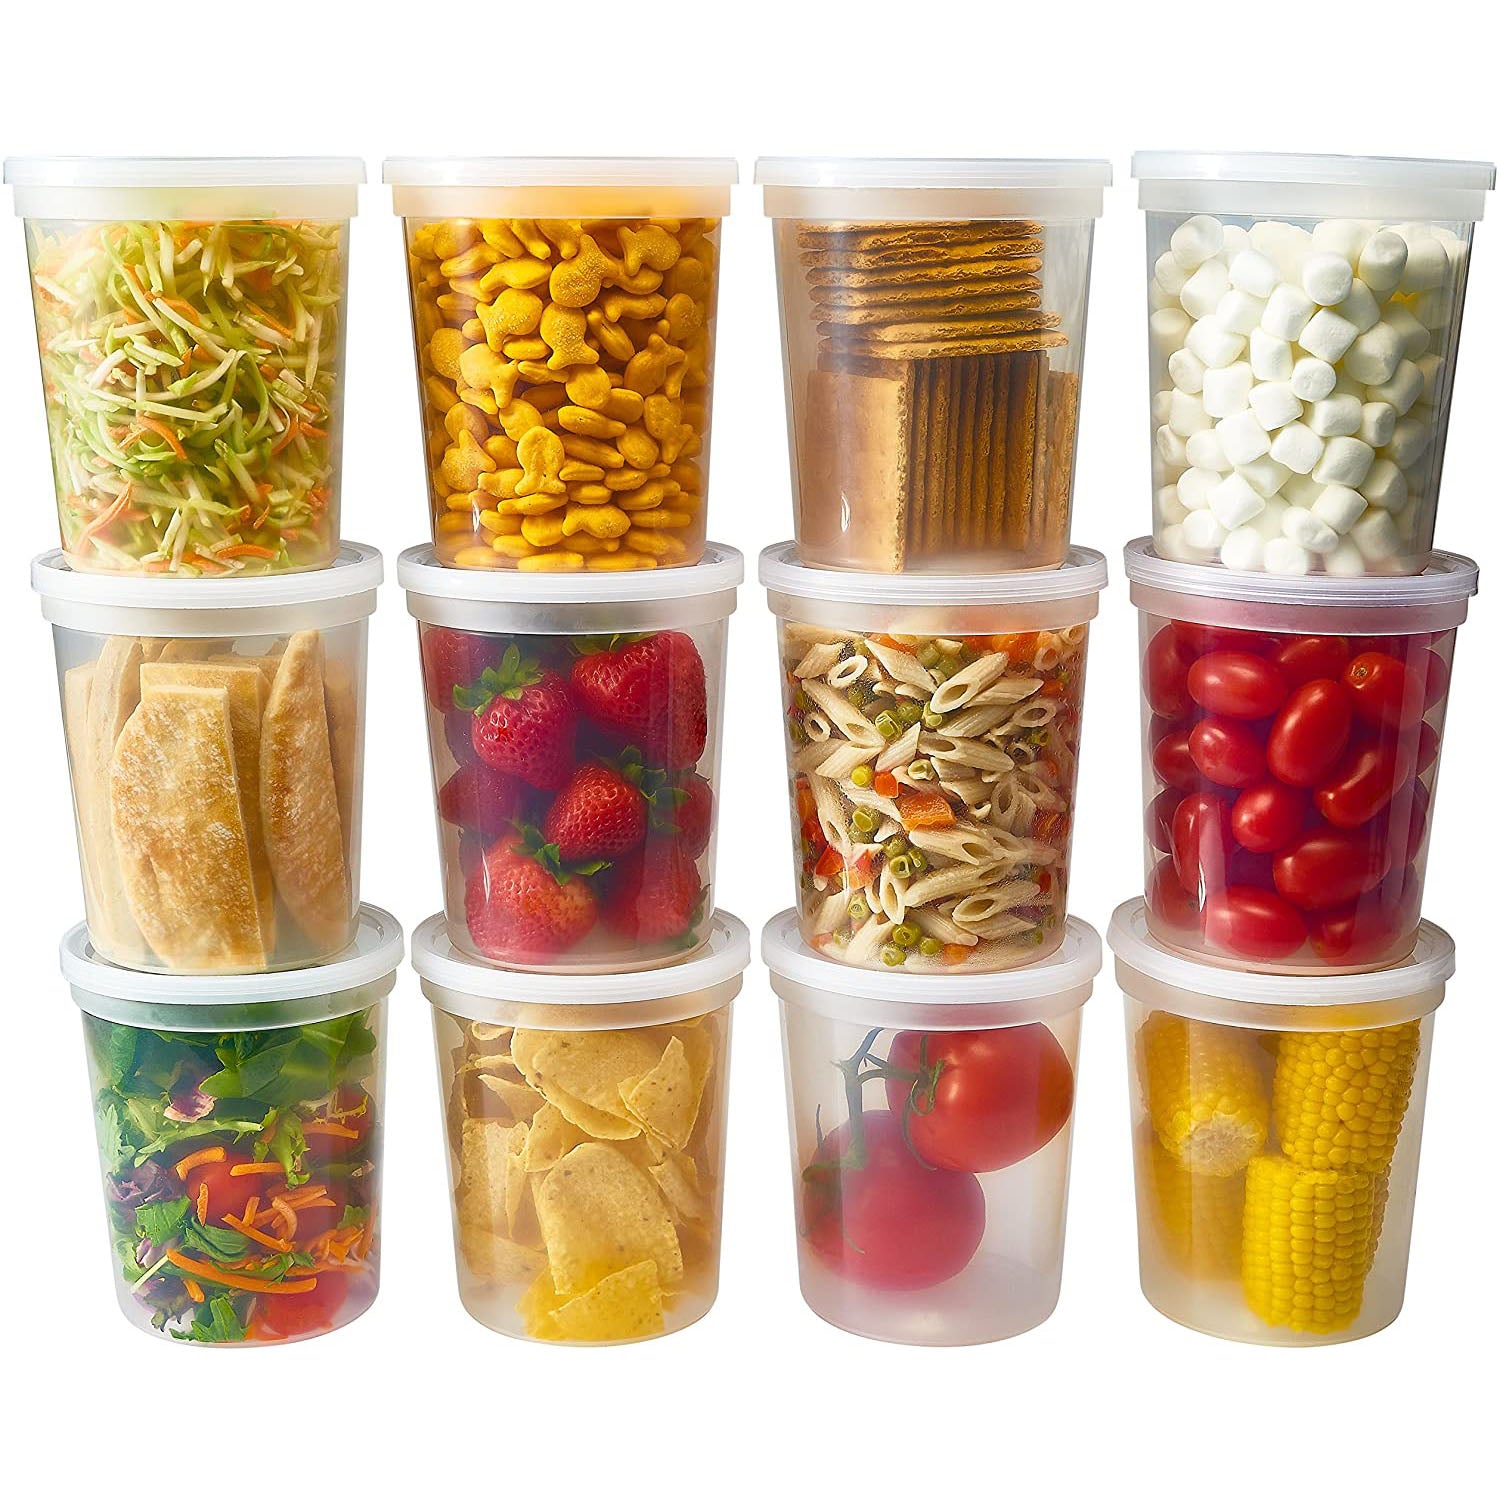  Deli Food Storage Containers with Lids, 16 Ounce (48 Count):  Home & Kitchen